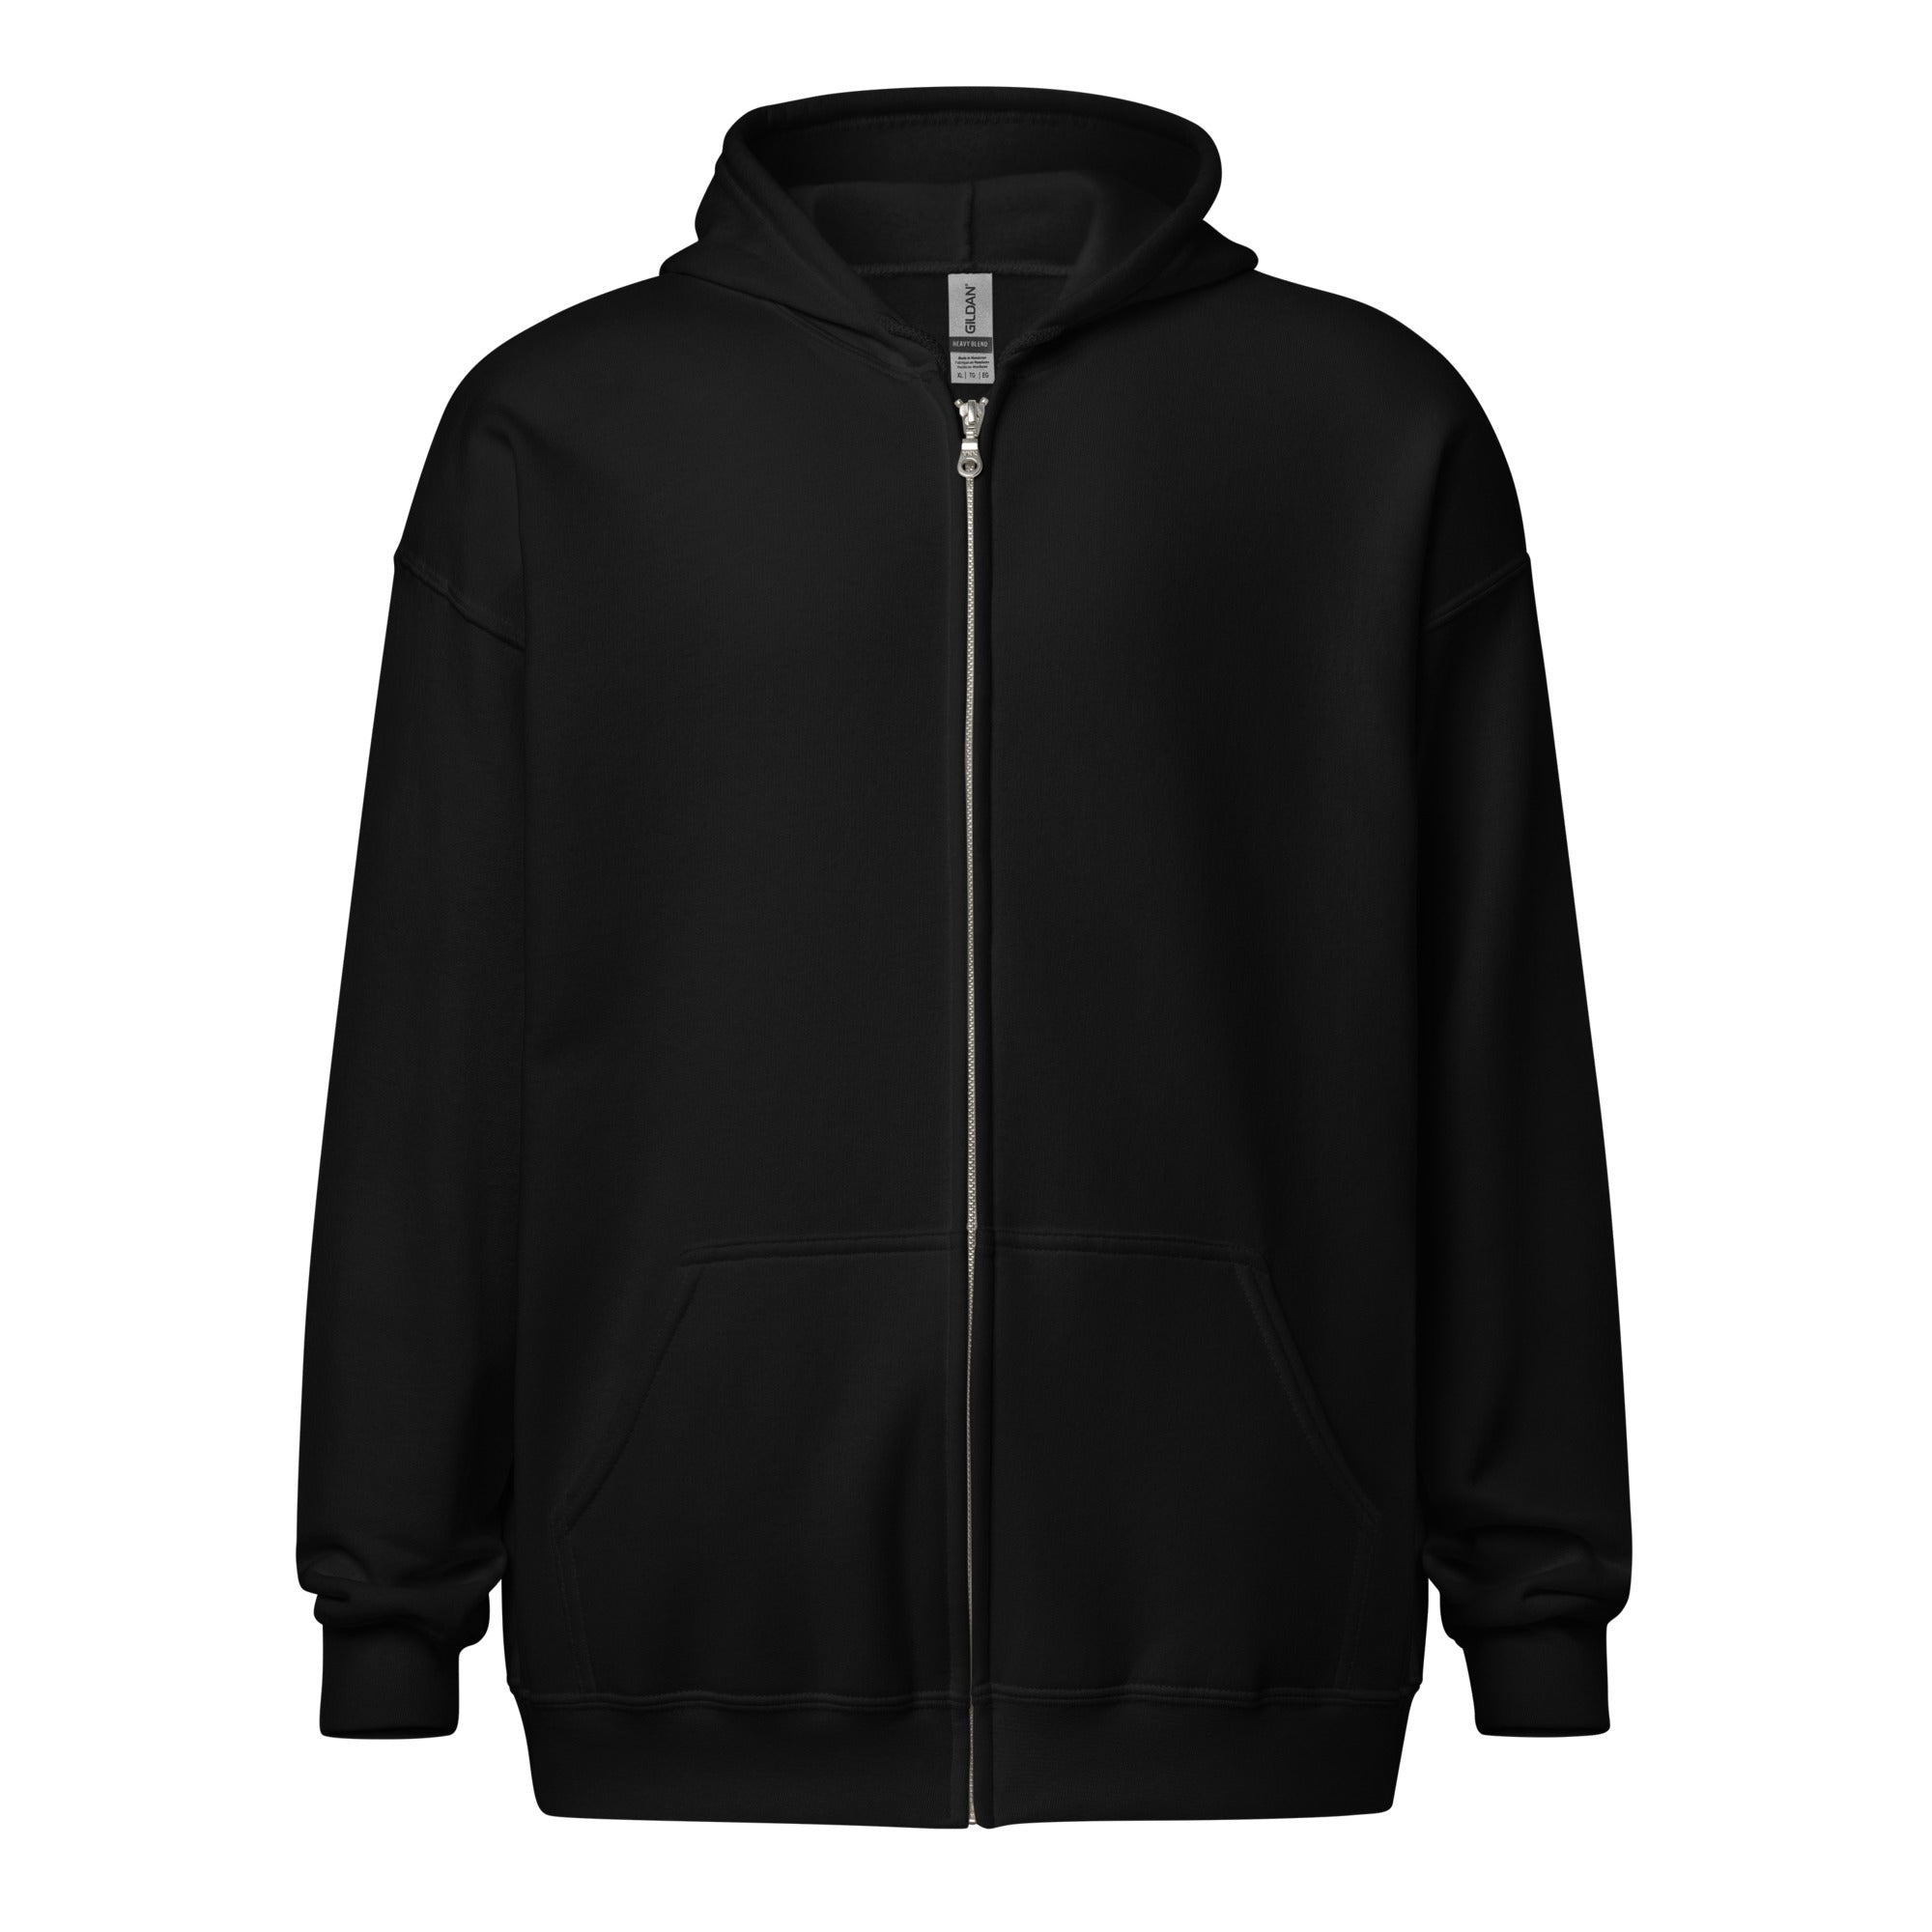 We Are the Carbon They Want To Reduce Heavy Blend Zip Hoodie